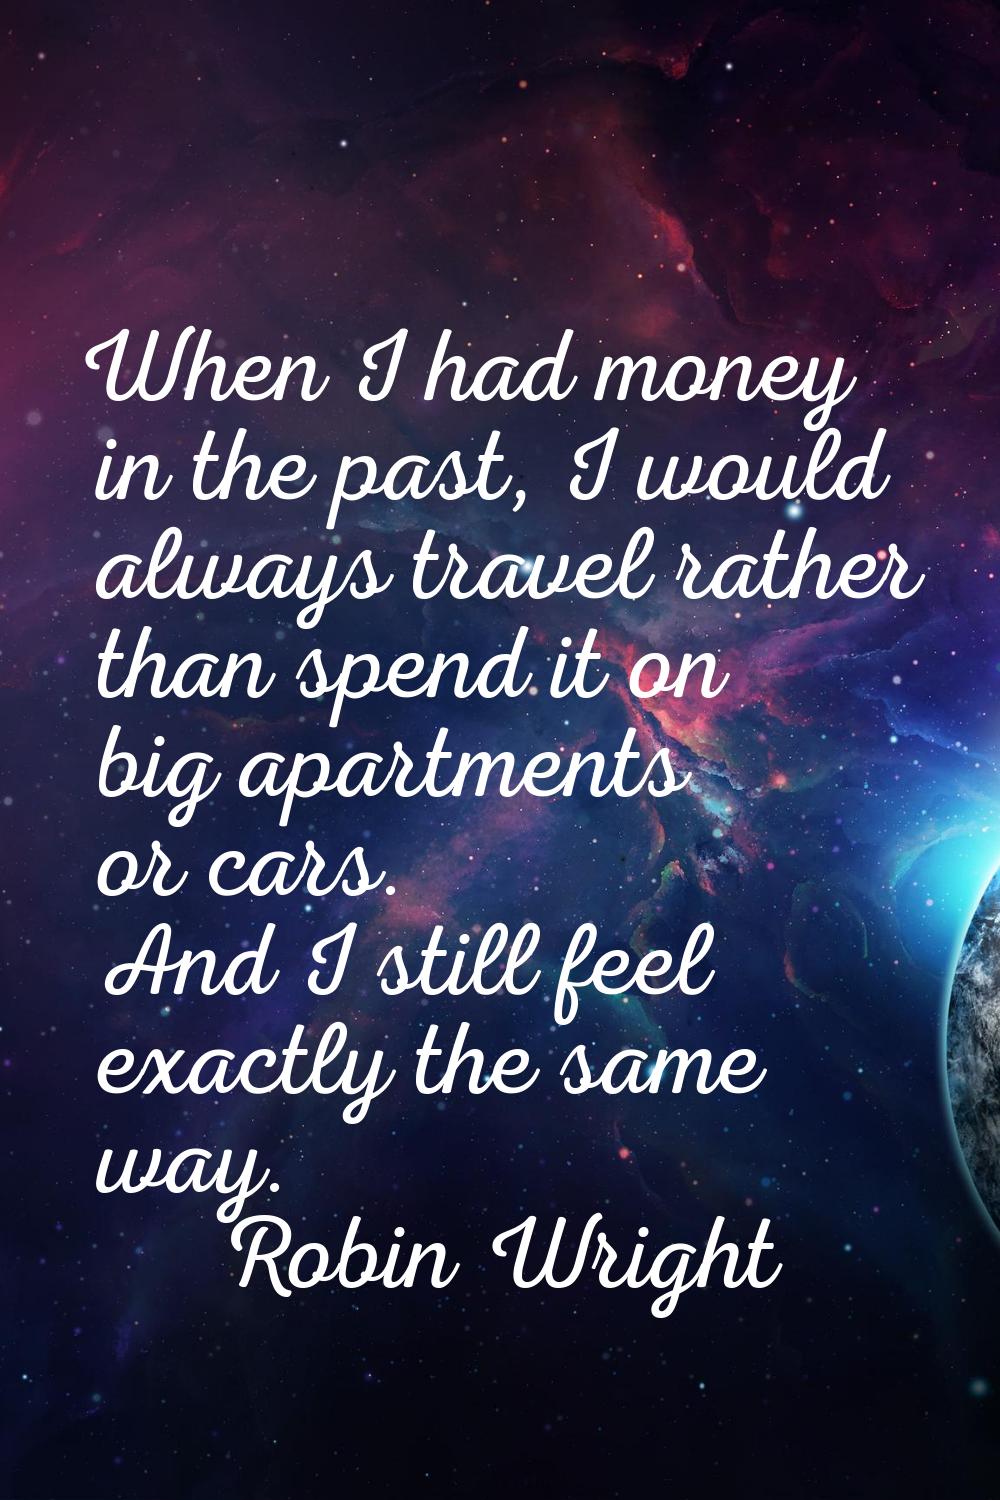 When I had money in the past, I would always travel rather than spend it on big apartments or cars.